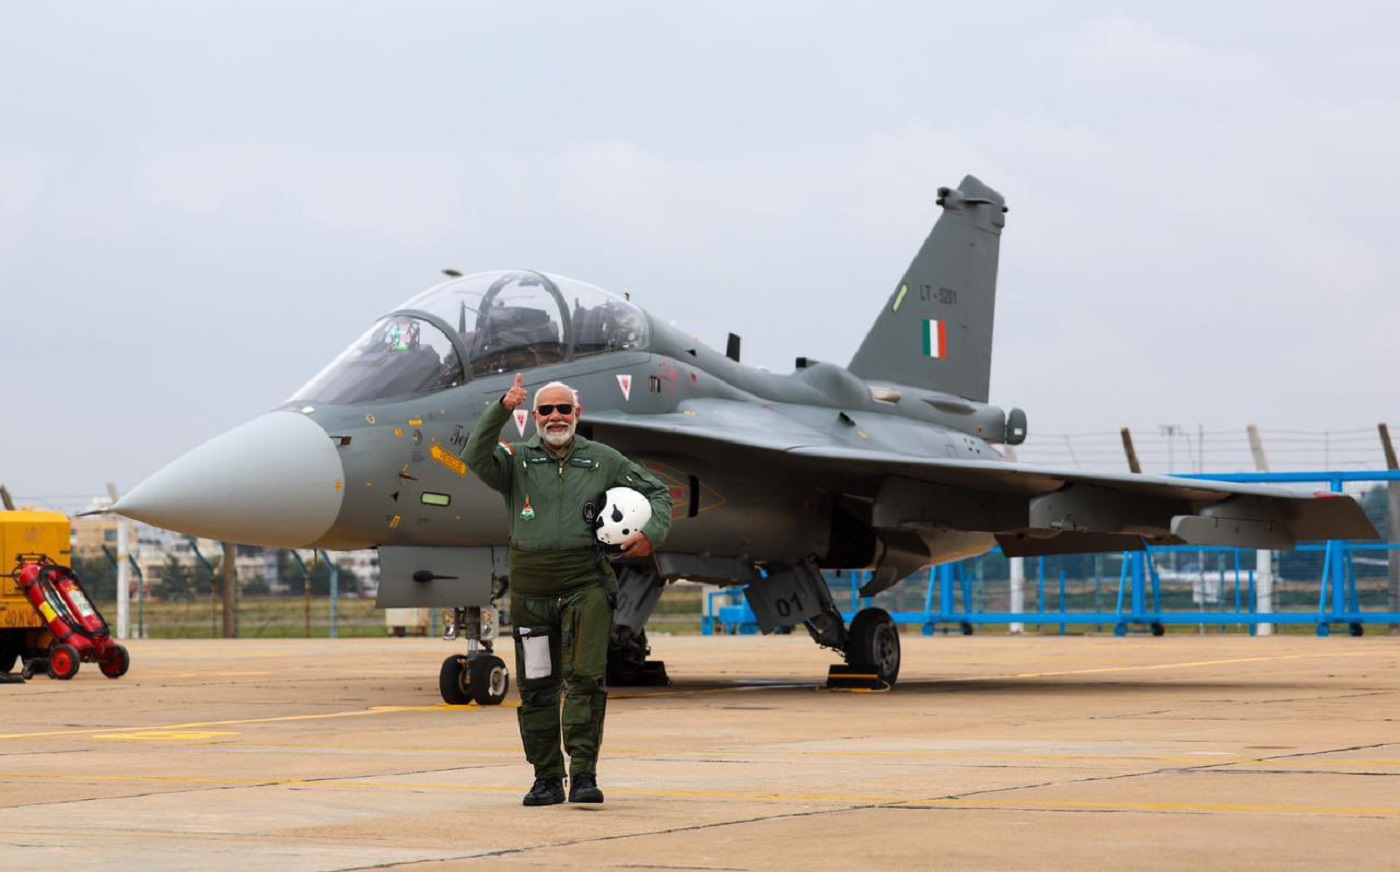 Narendra Modi Becomes First Indian Prime Minister to Fly in LCA Tejas Light Combat Aircraft